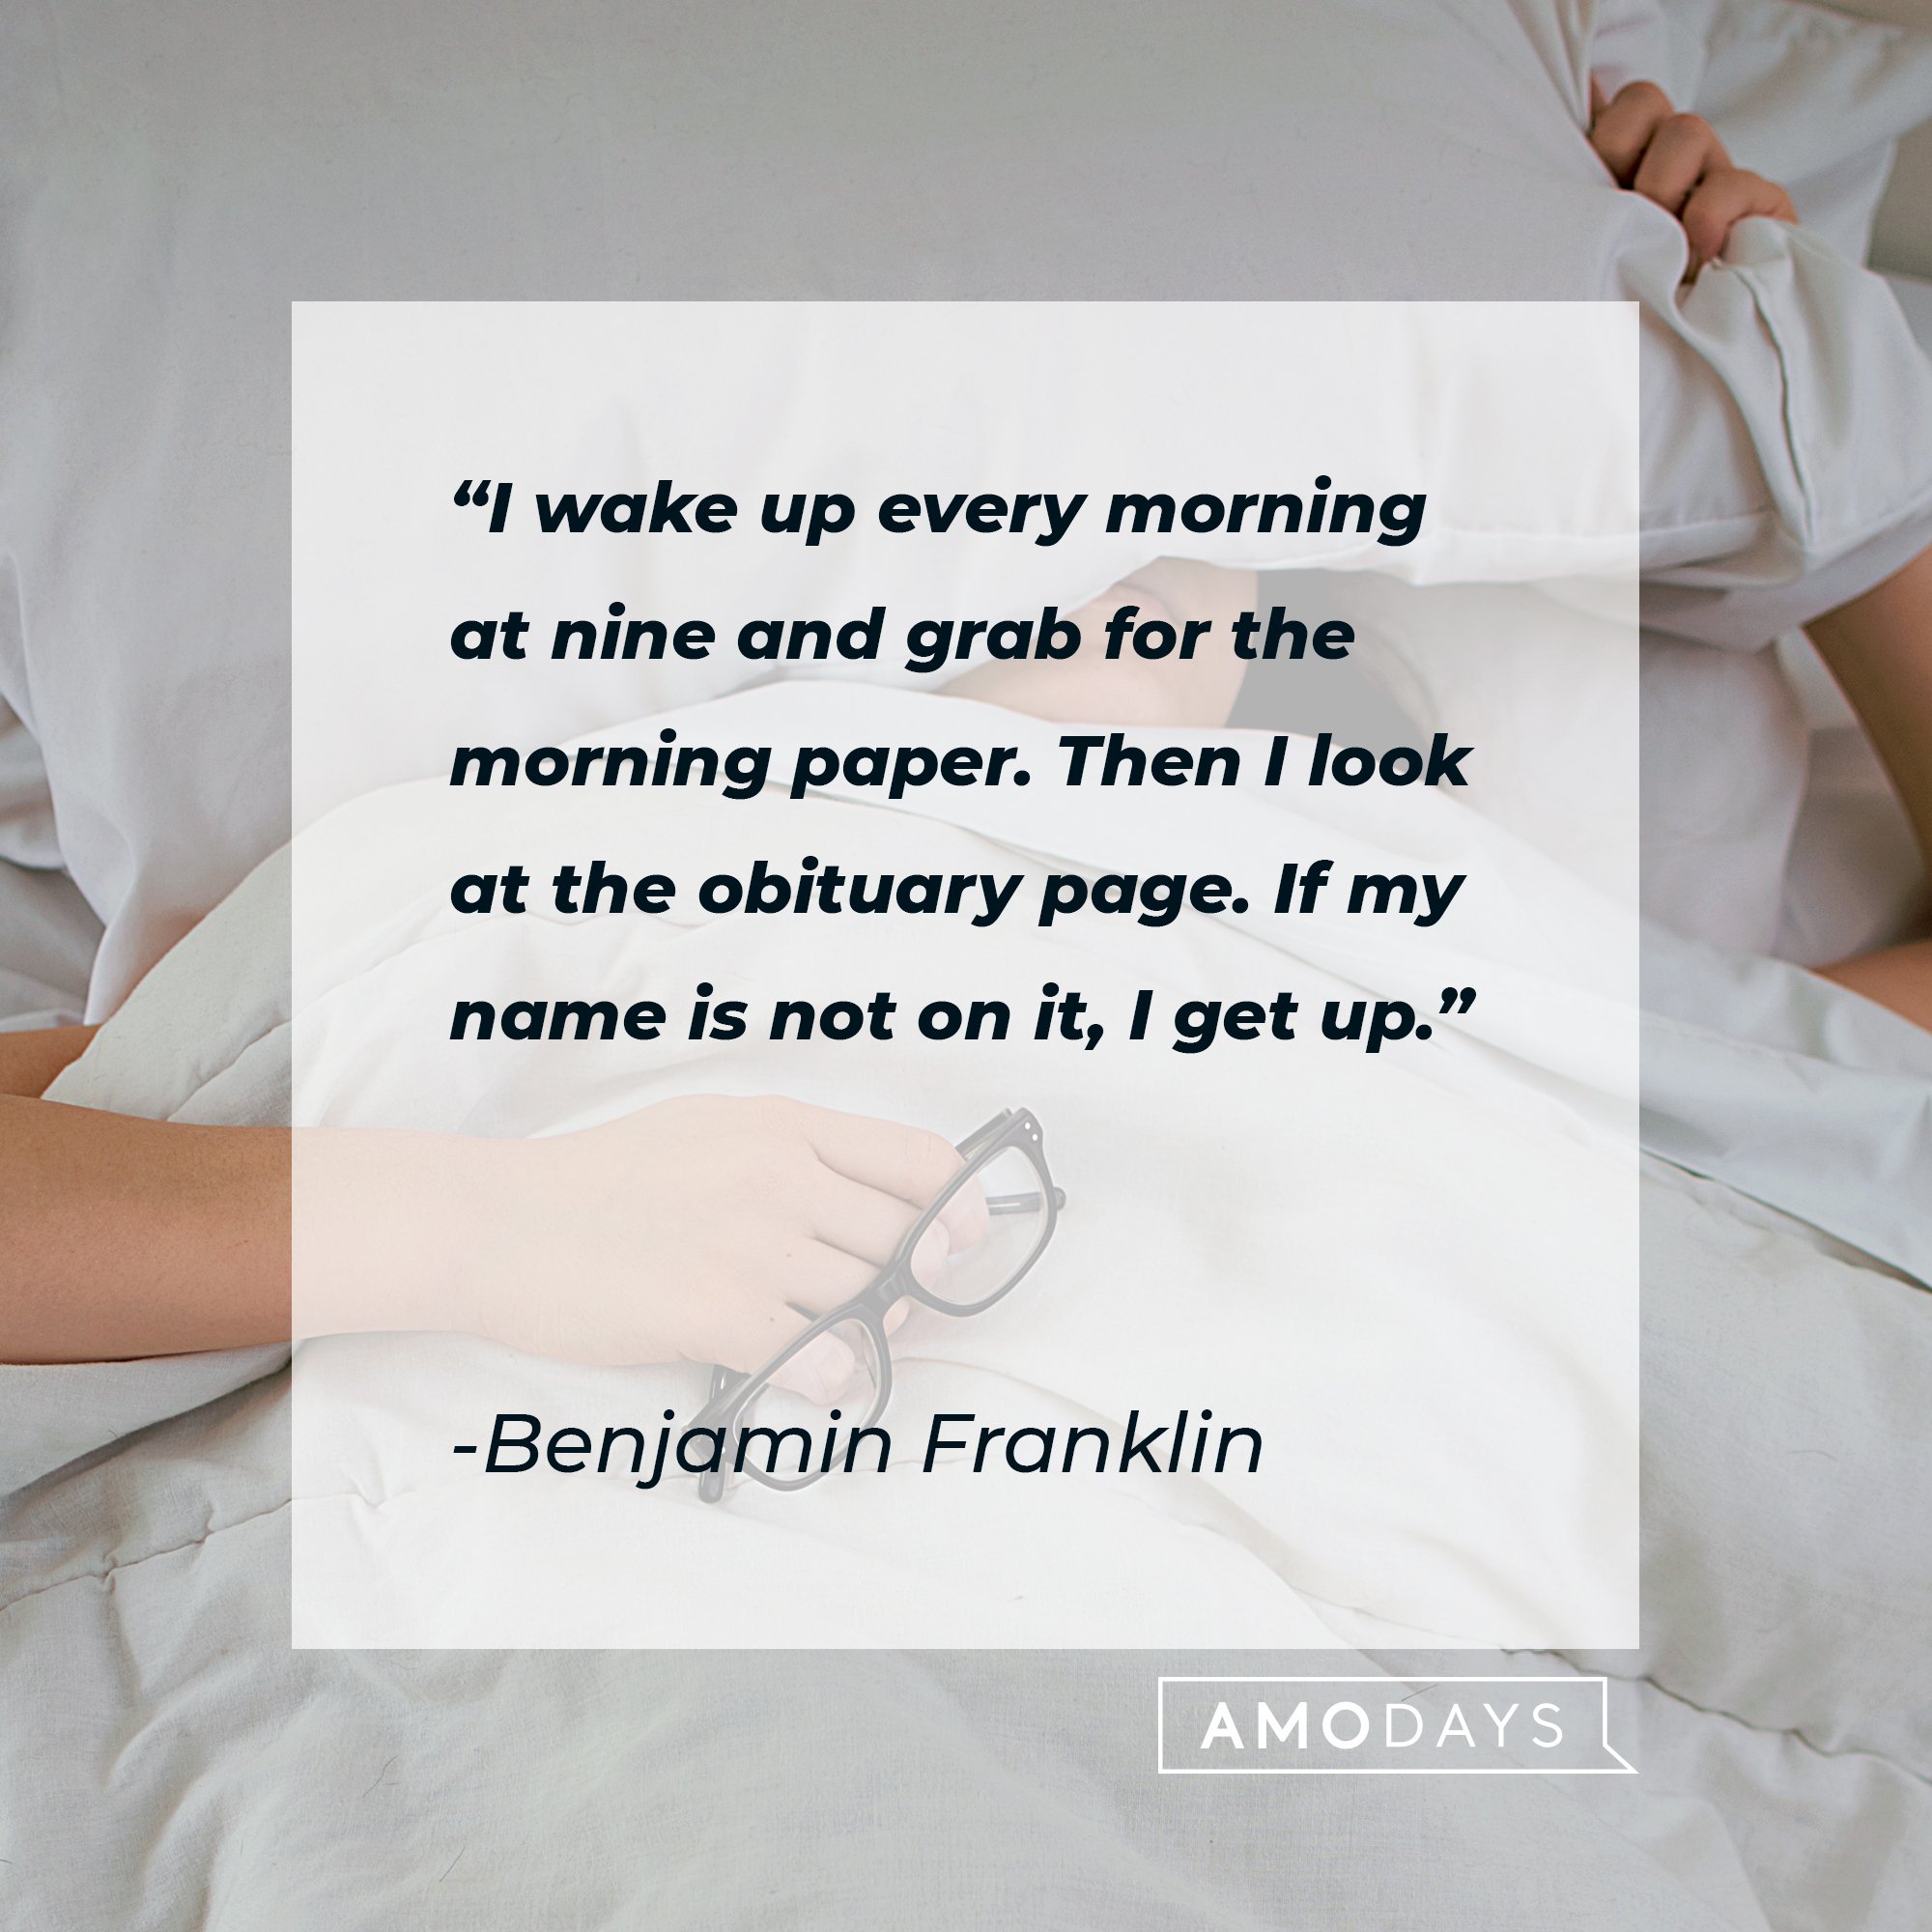 Benjamin Franklin’s quote: "I wake up every morning at nine and grab for the morning paper. Then I look at the obituary page. If my name is not on it, I get up."  | Image: AmoDays 